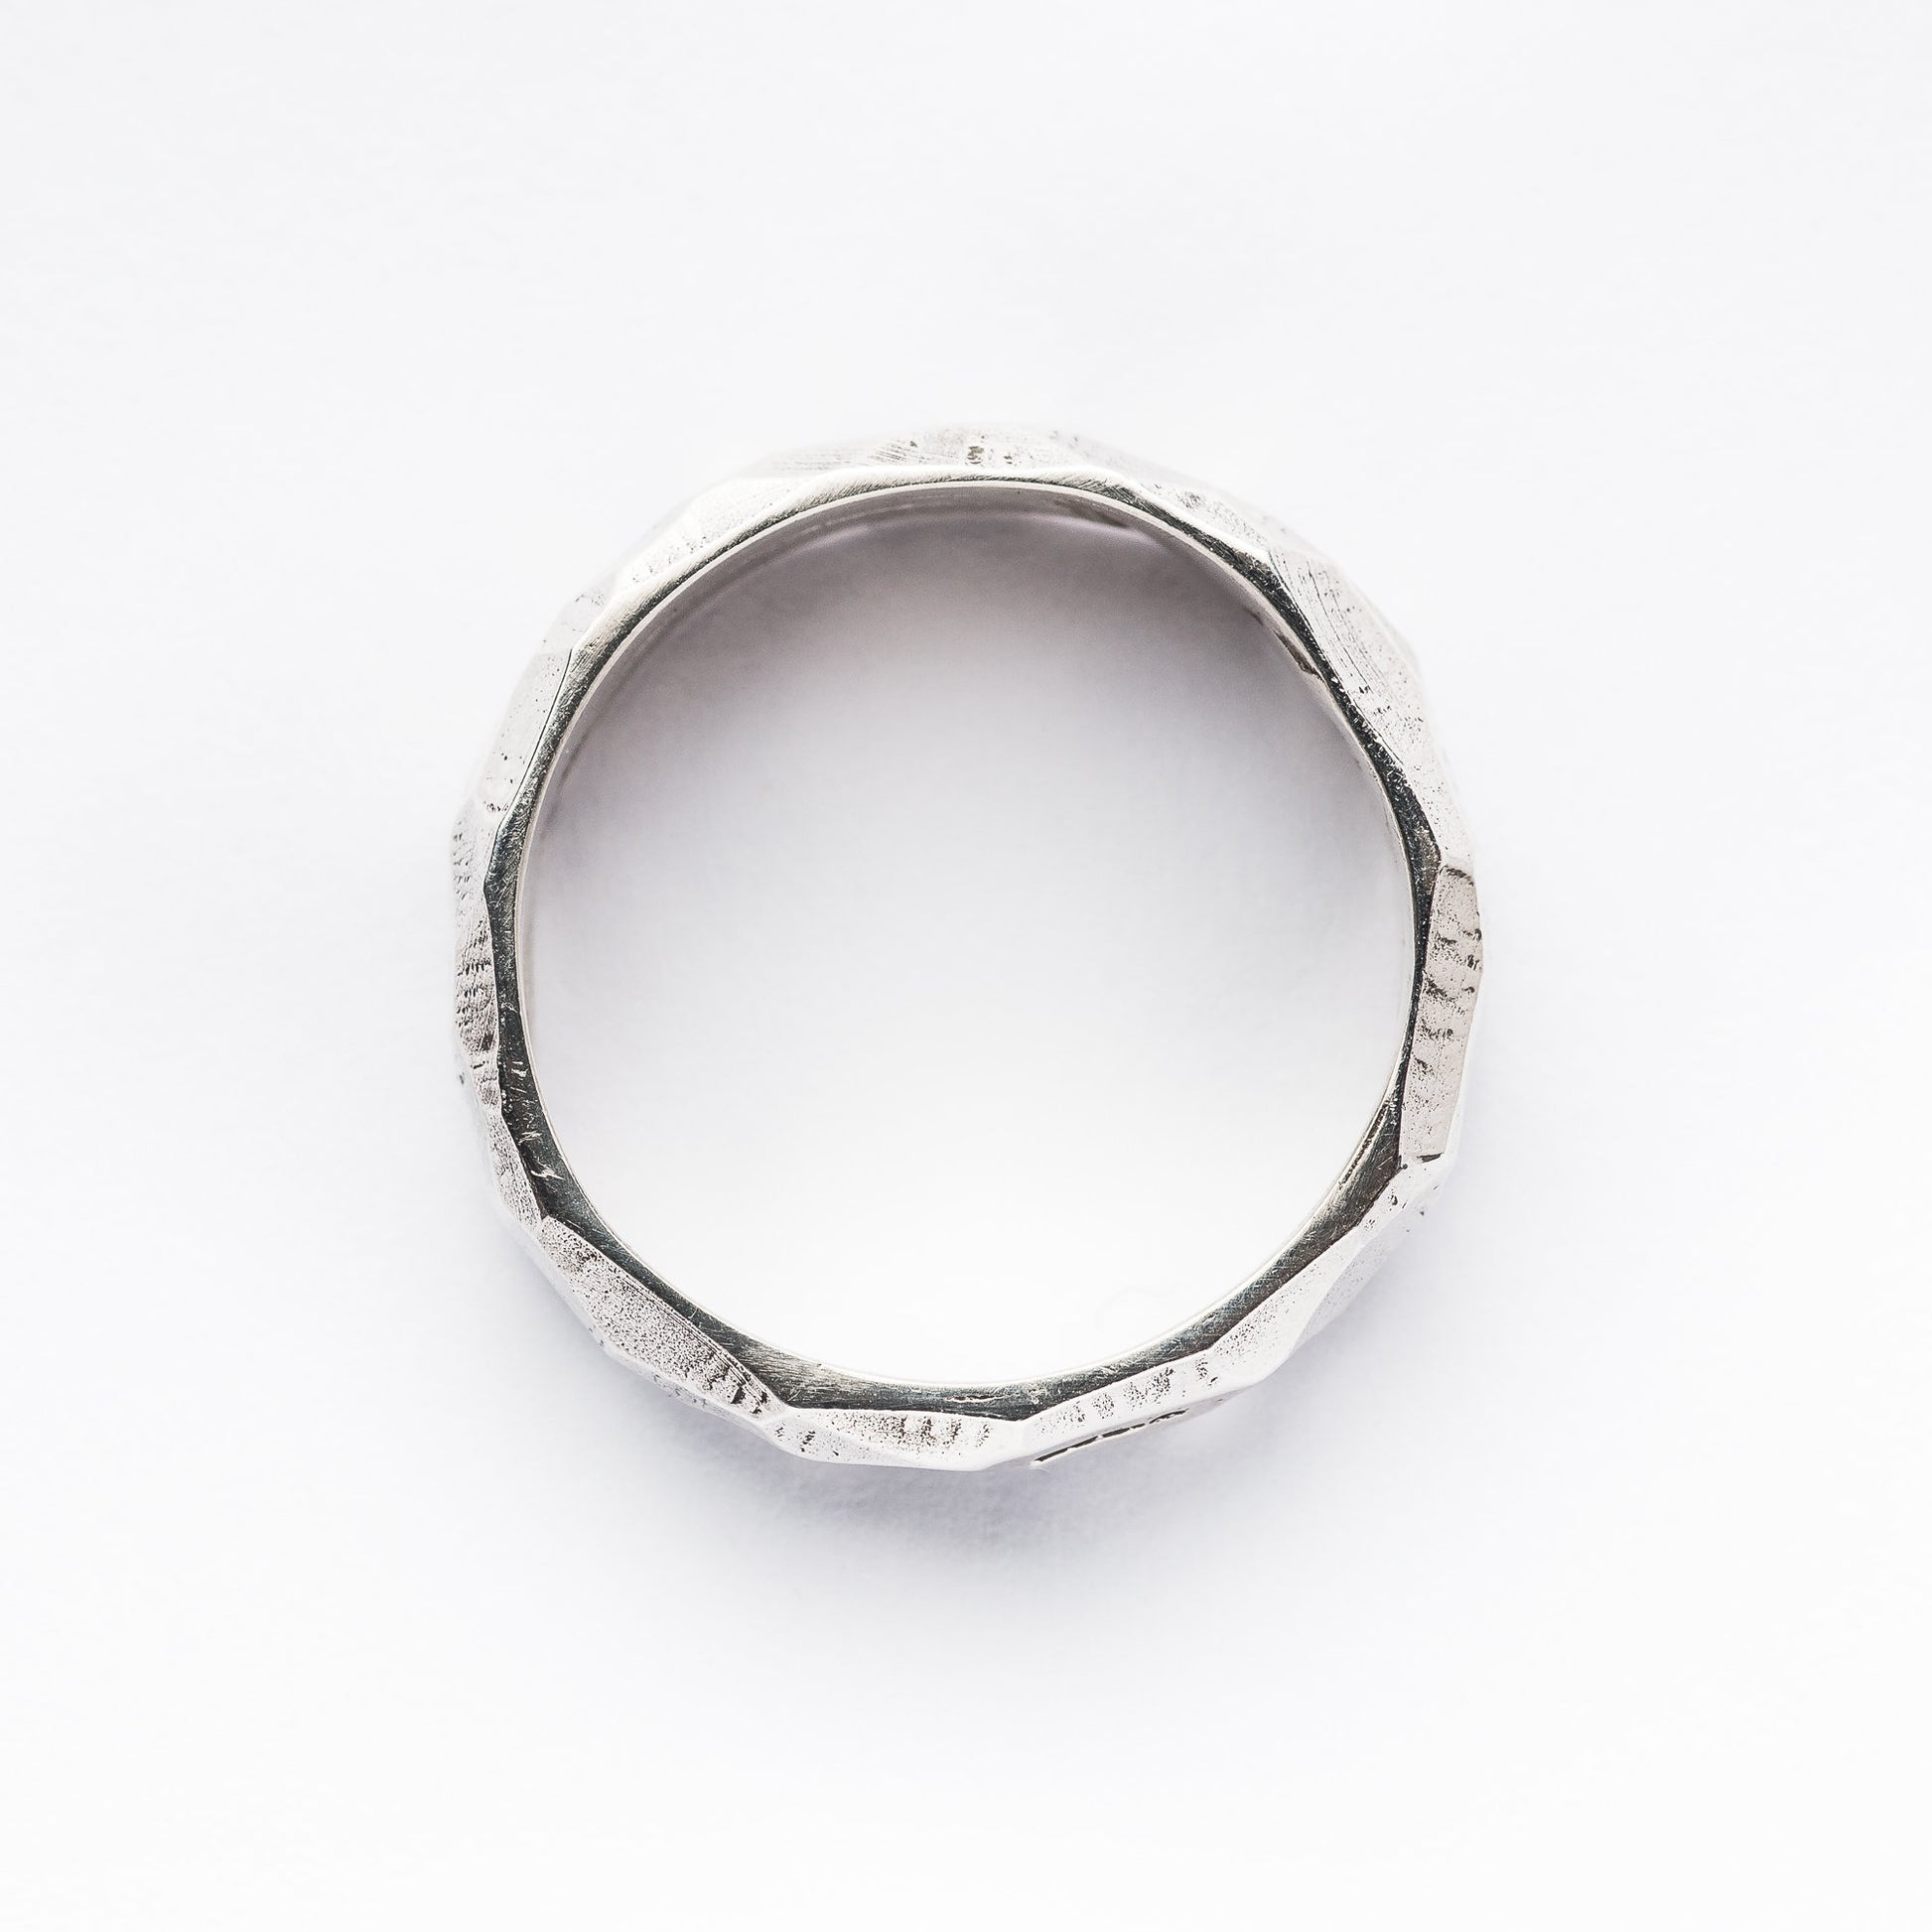 A silver rough cut and faceted ring sits against a crisp, white background. This view is from the top.